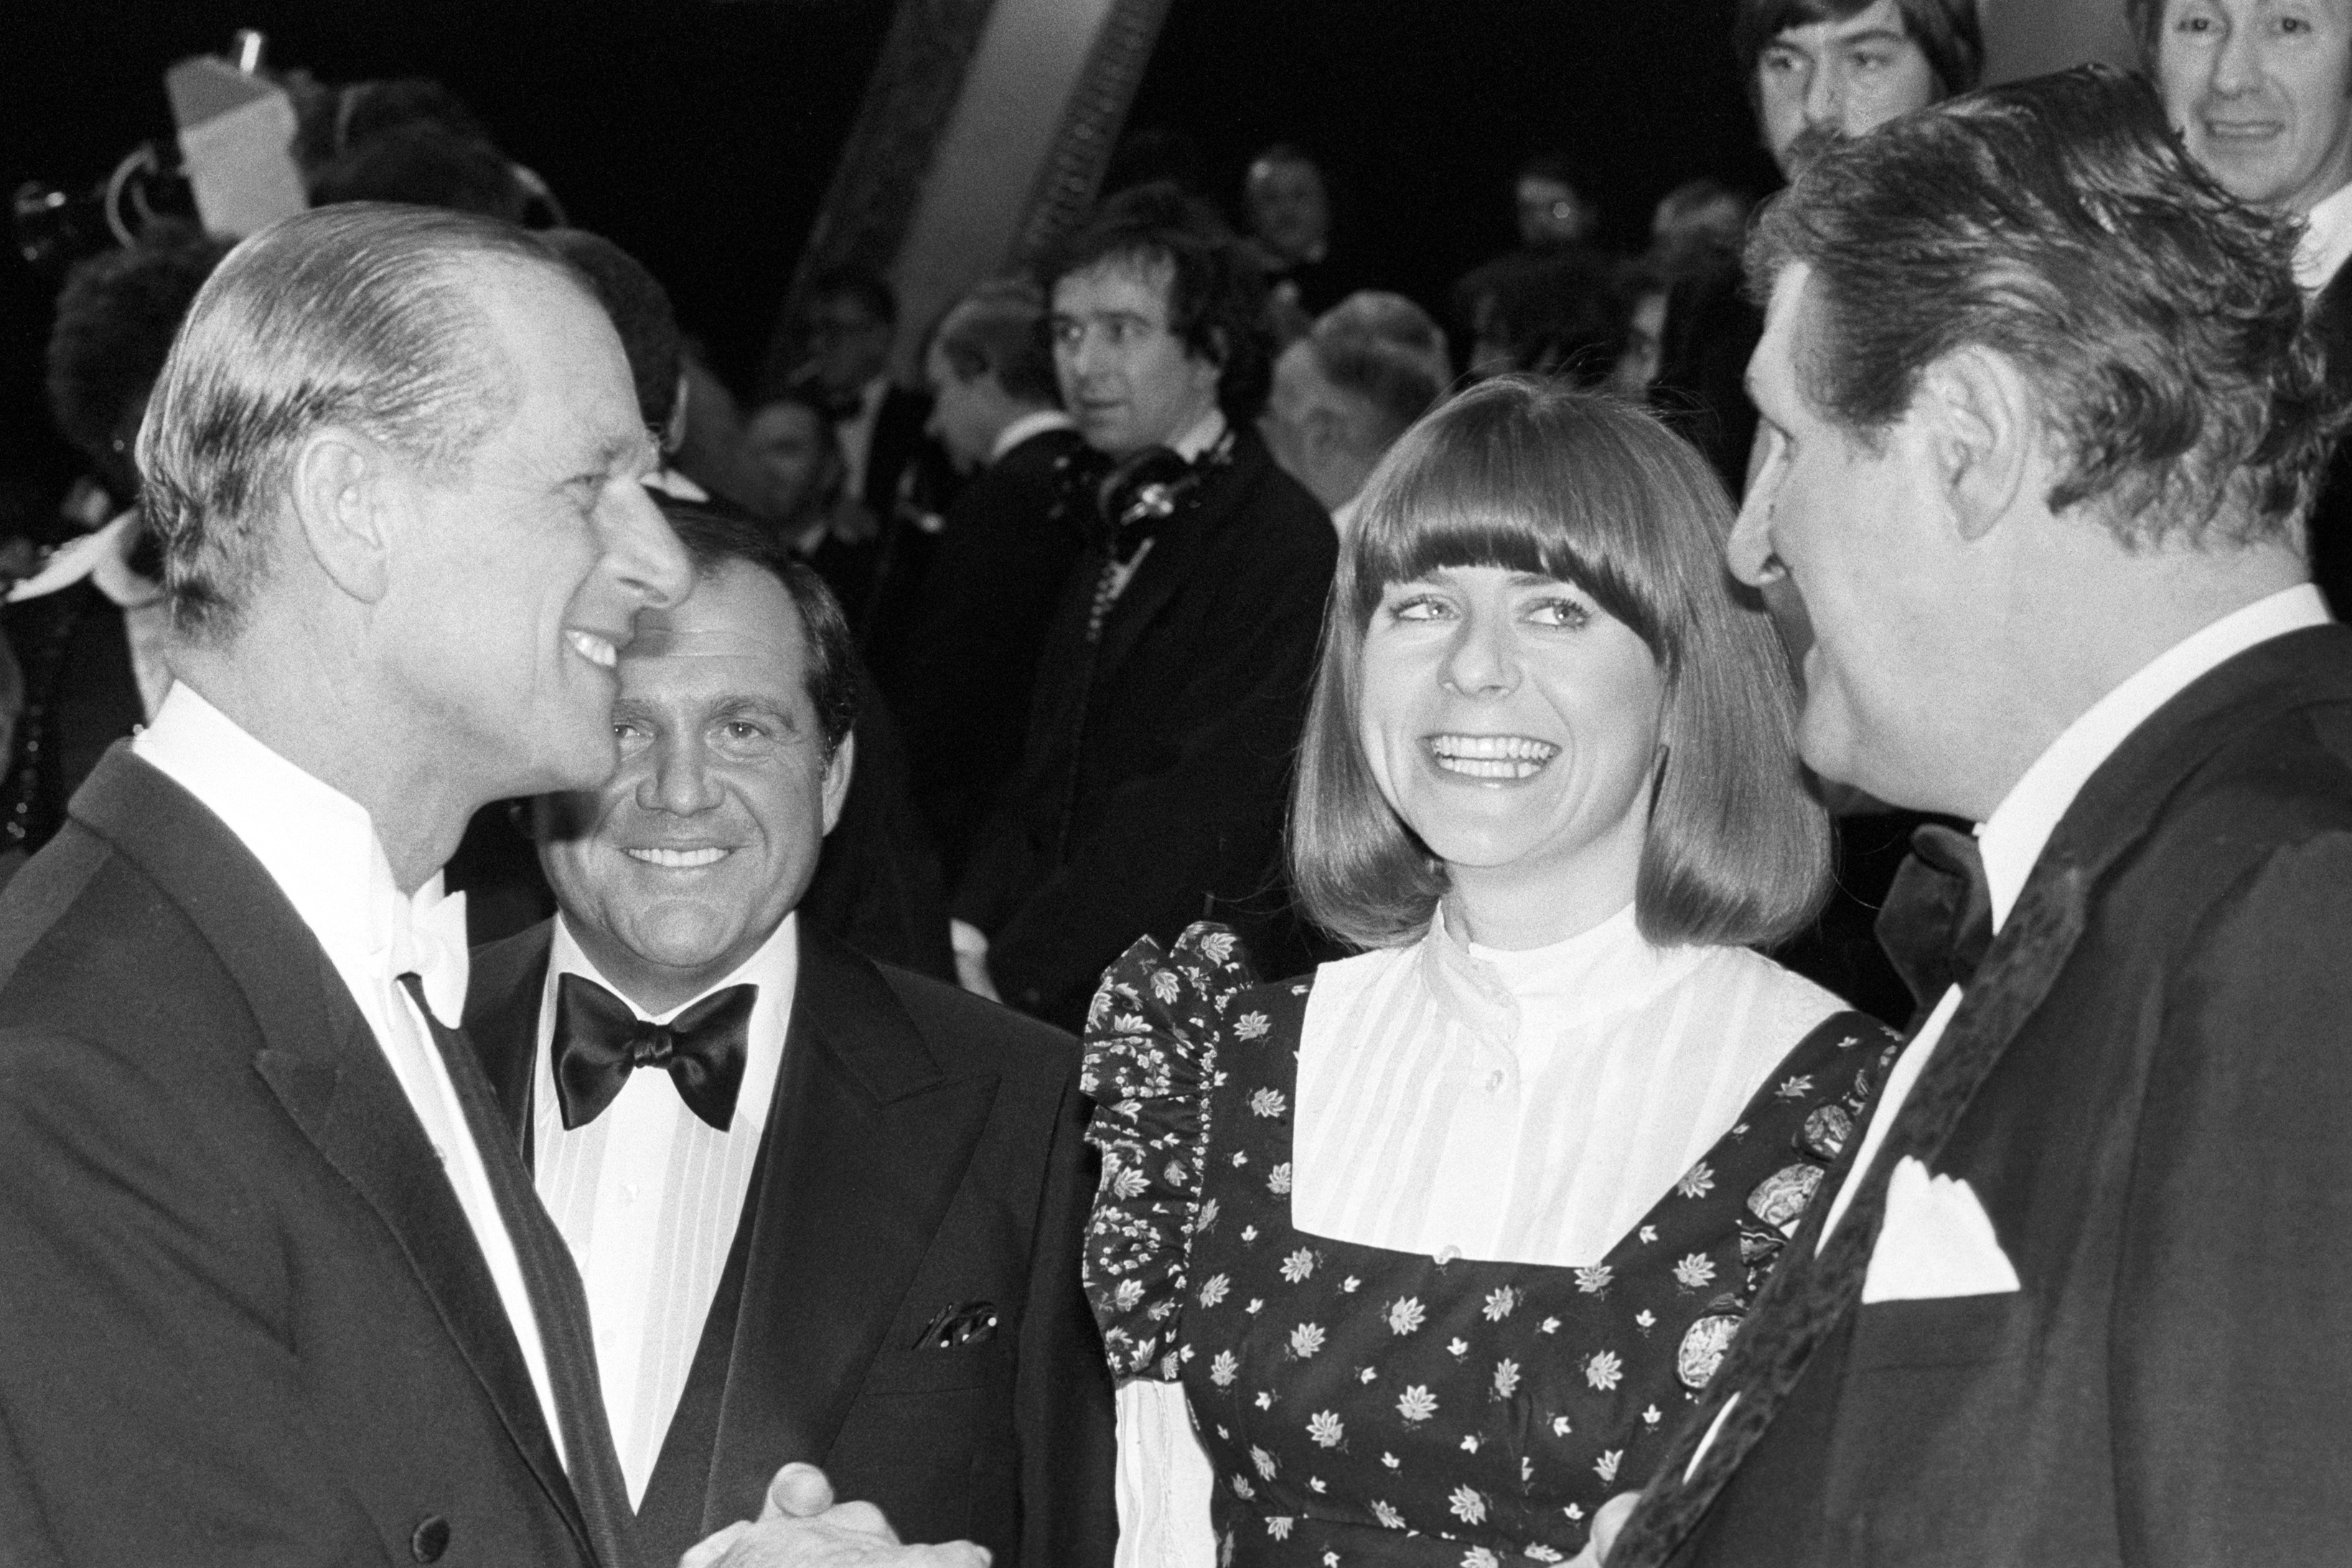 Pam Ayres and comic magician Tommy Cooper talking to the Duke of Edinburgh Silver Jubilee Royal Variety Gala at the London Palladium with Her Majesty the Queen in 1977 (PA)